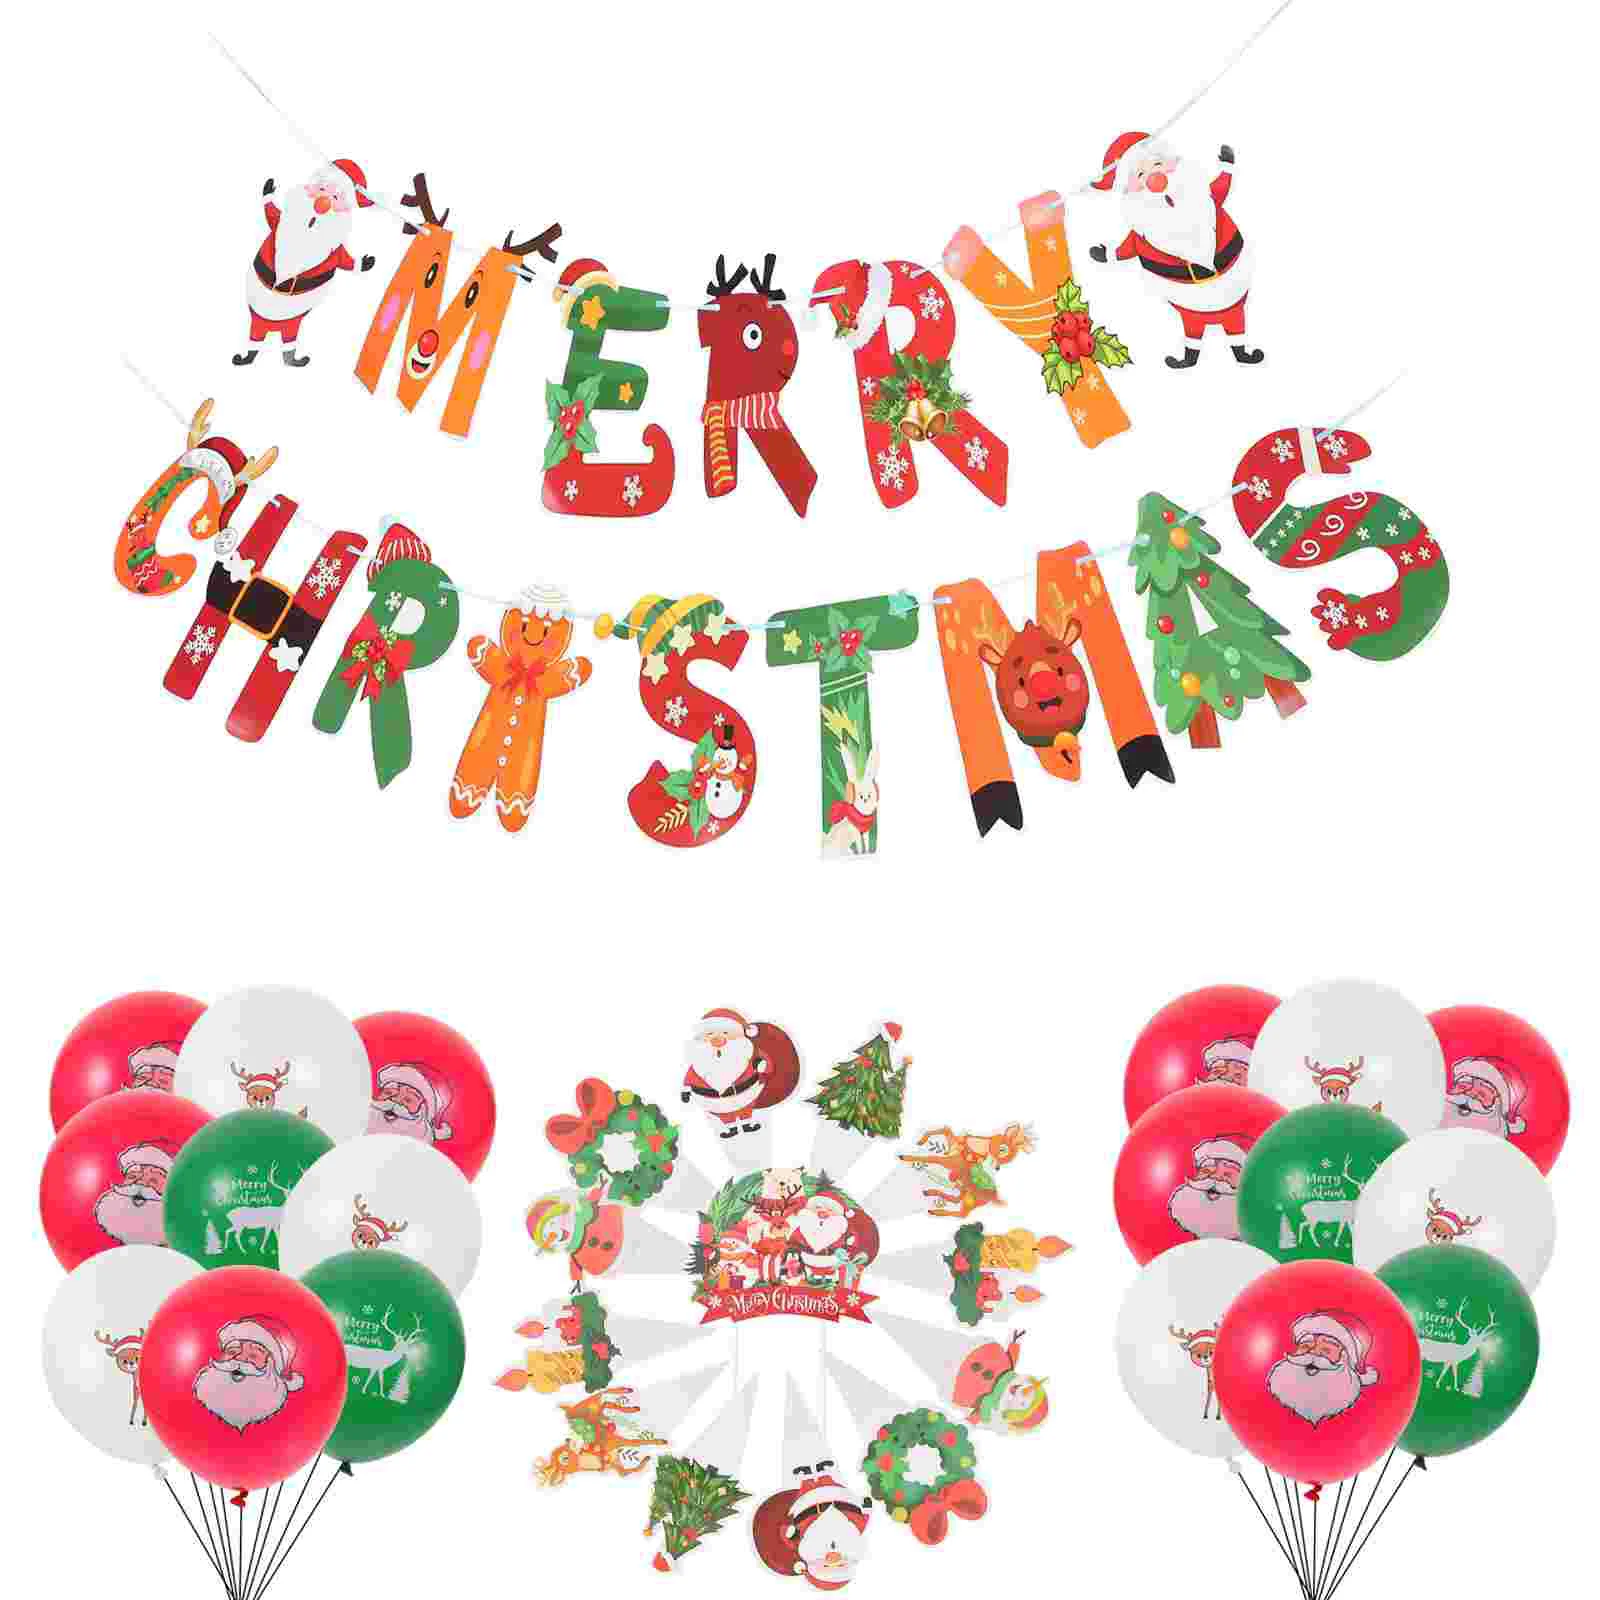 

Christmas Balloon Party Decors Supplies Decoration Decorate Cake Decorations Emulsion Xmas Topper Toppers Hanging Banners